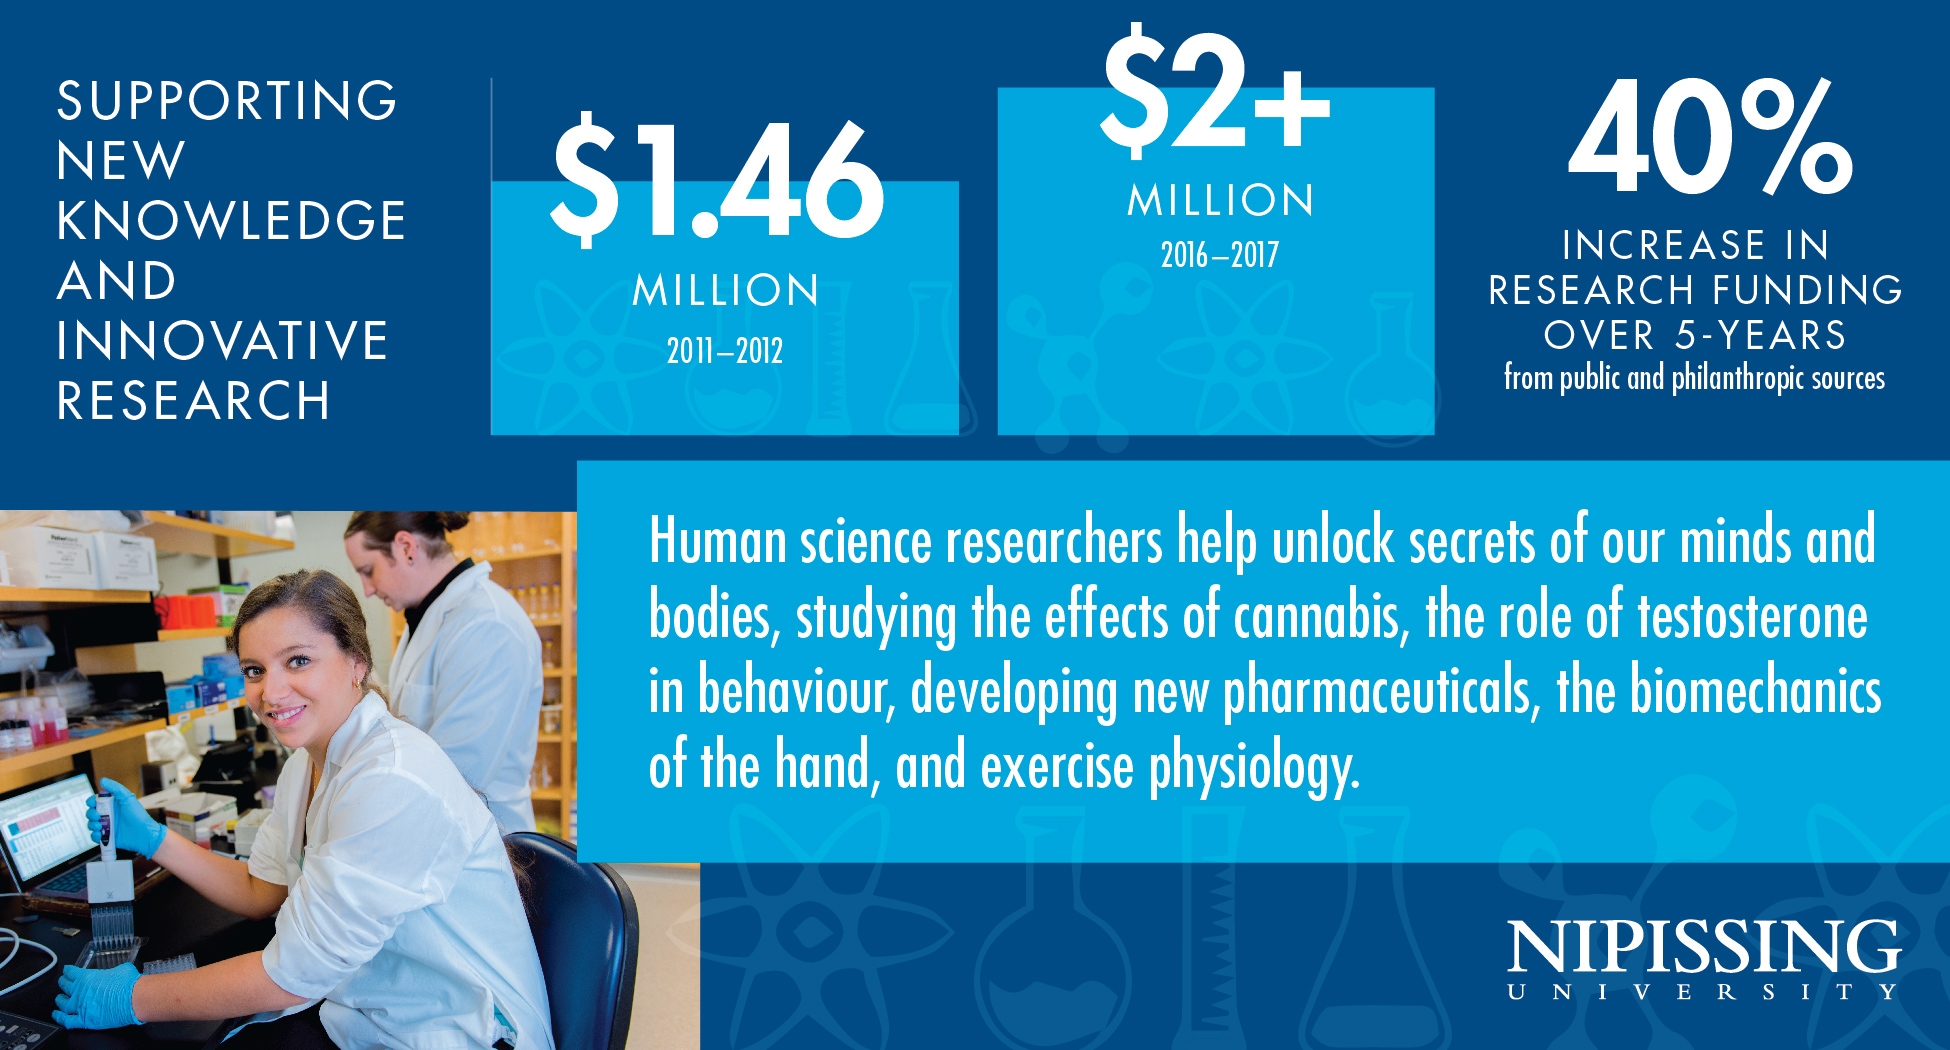 Economic Infographic 3x2 human science research